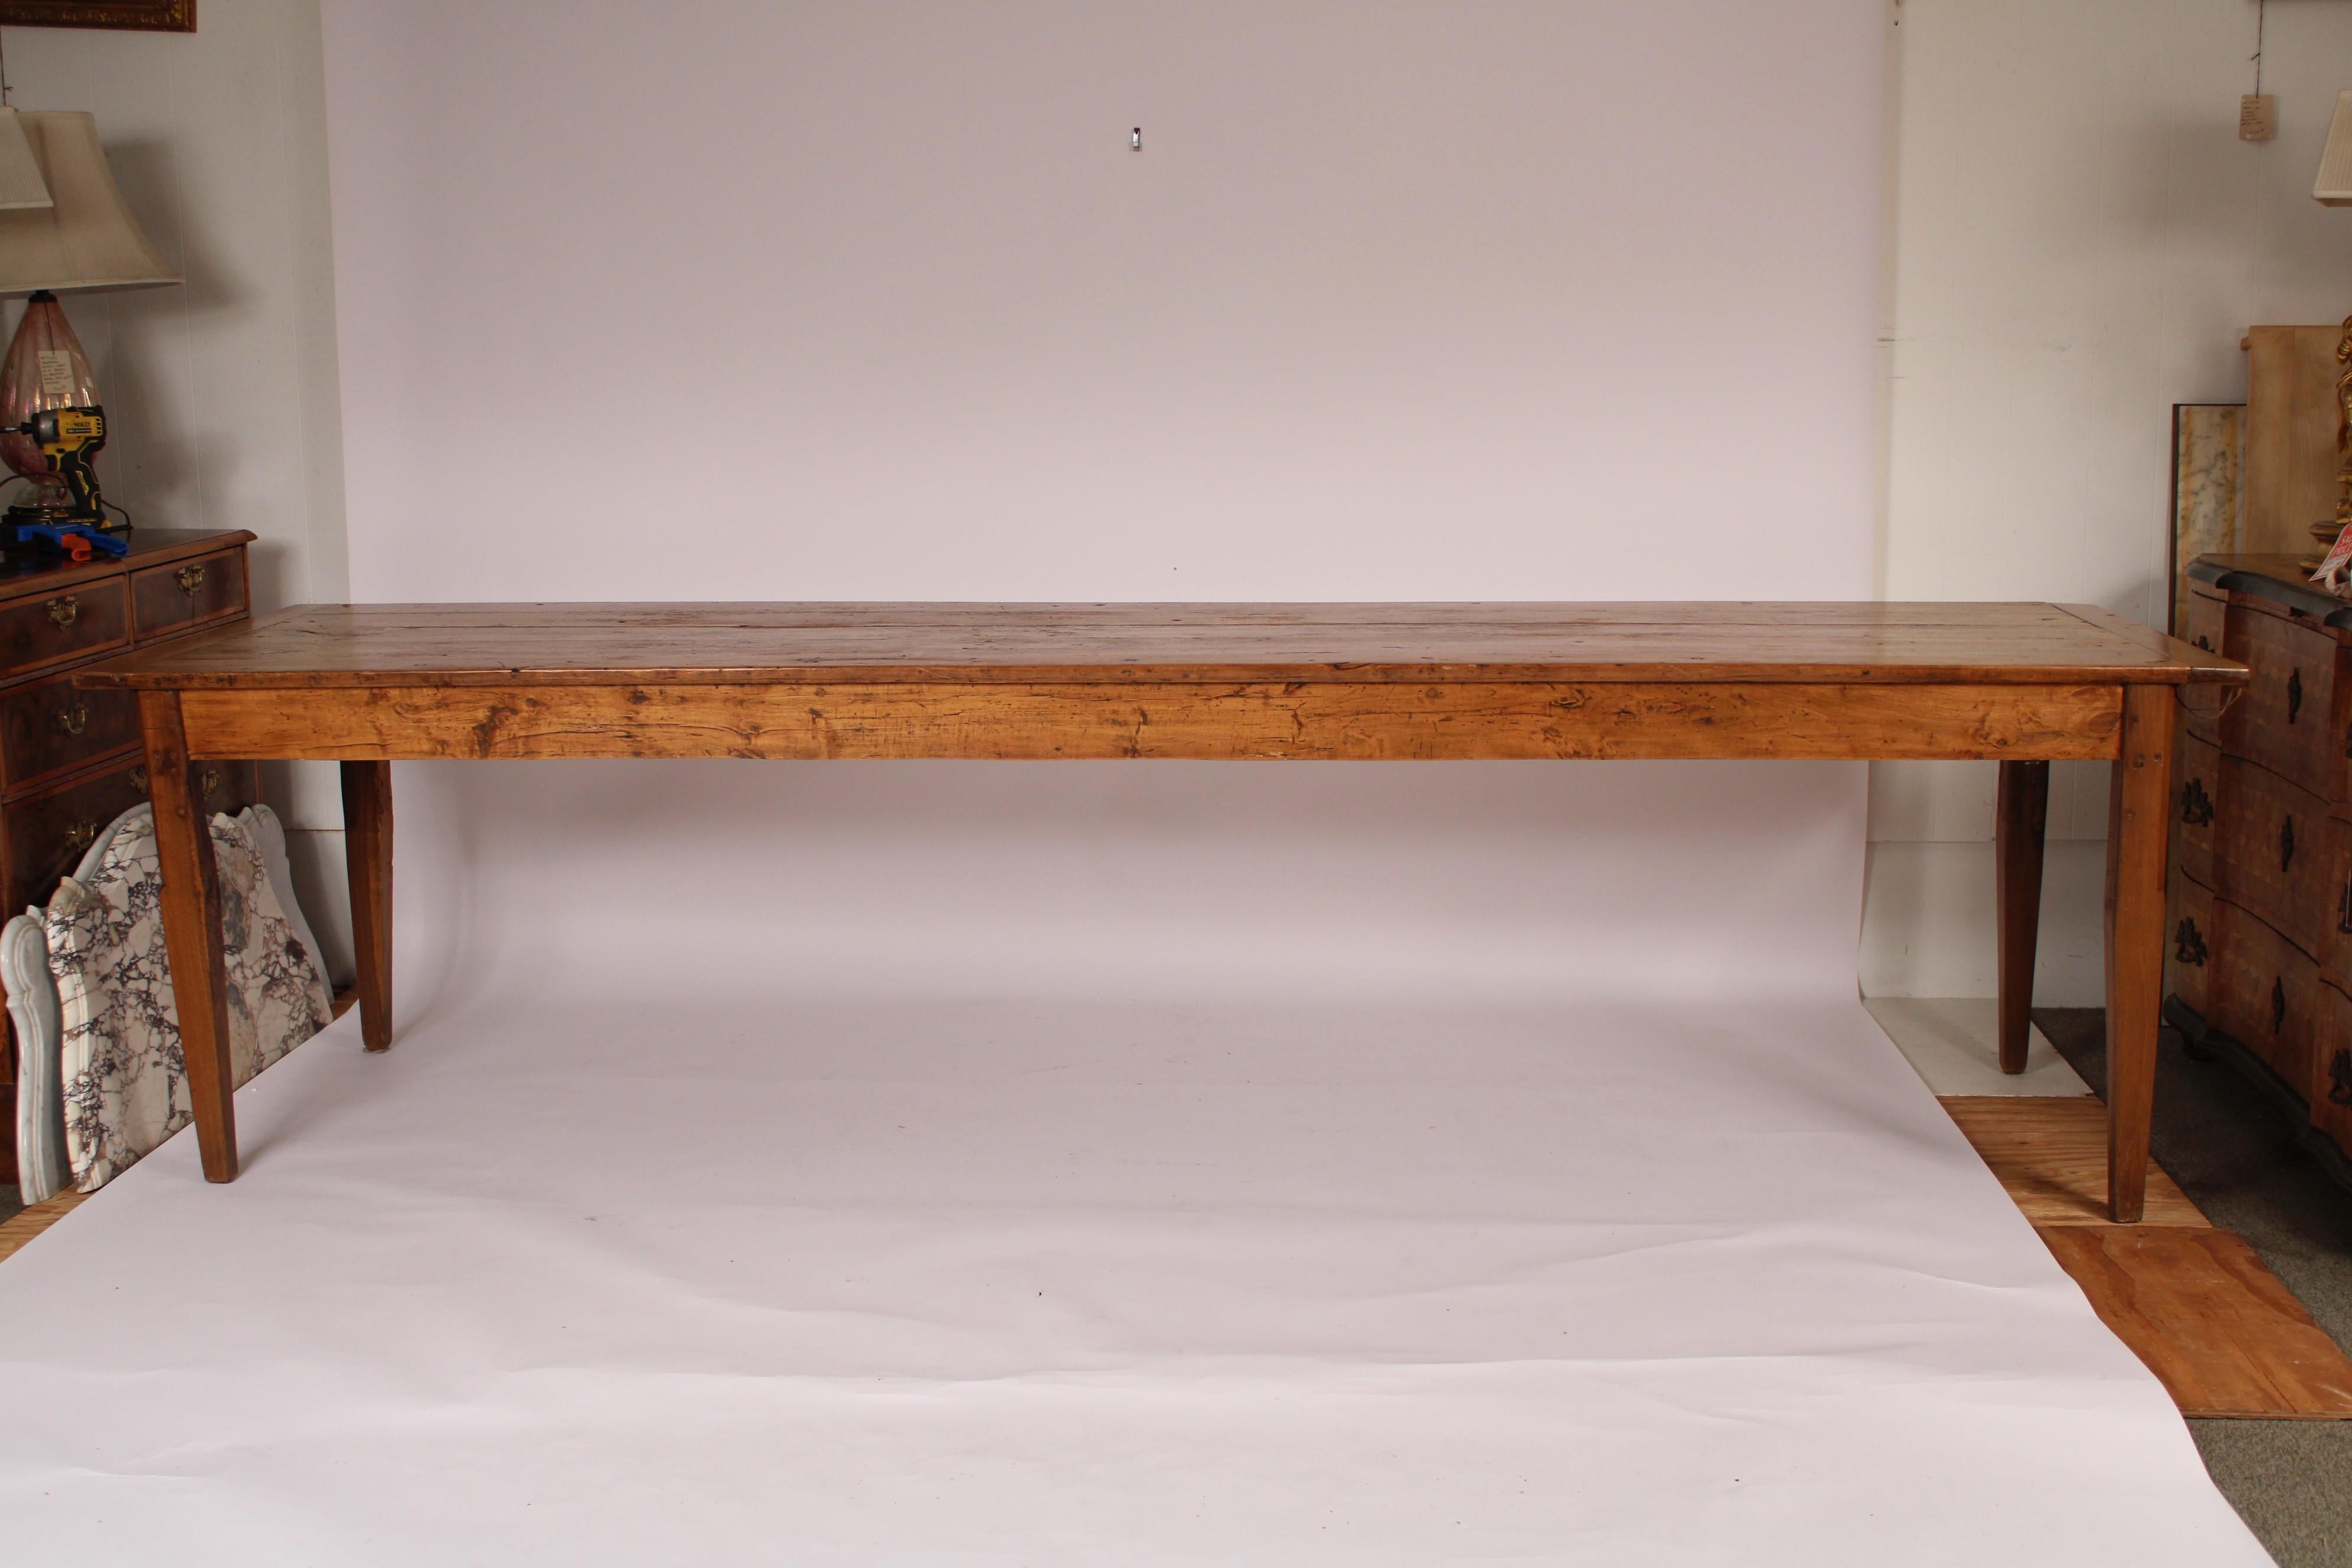 Antique Directoire style fruitwood dining room table, late 19th century. With a 6-board plank top, drawer at each end of the table resting on square tapered legs. Knee clearance 25